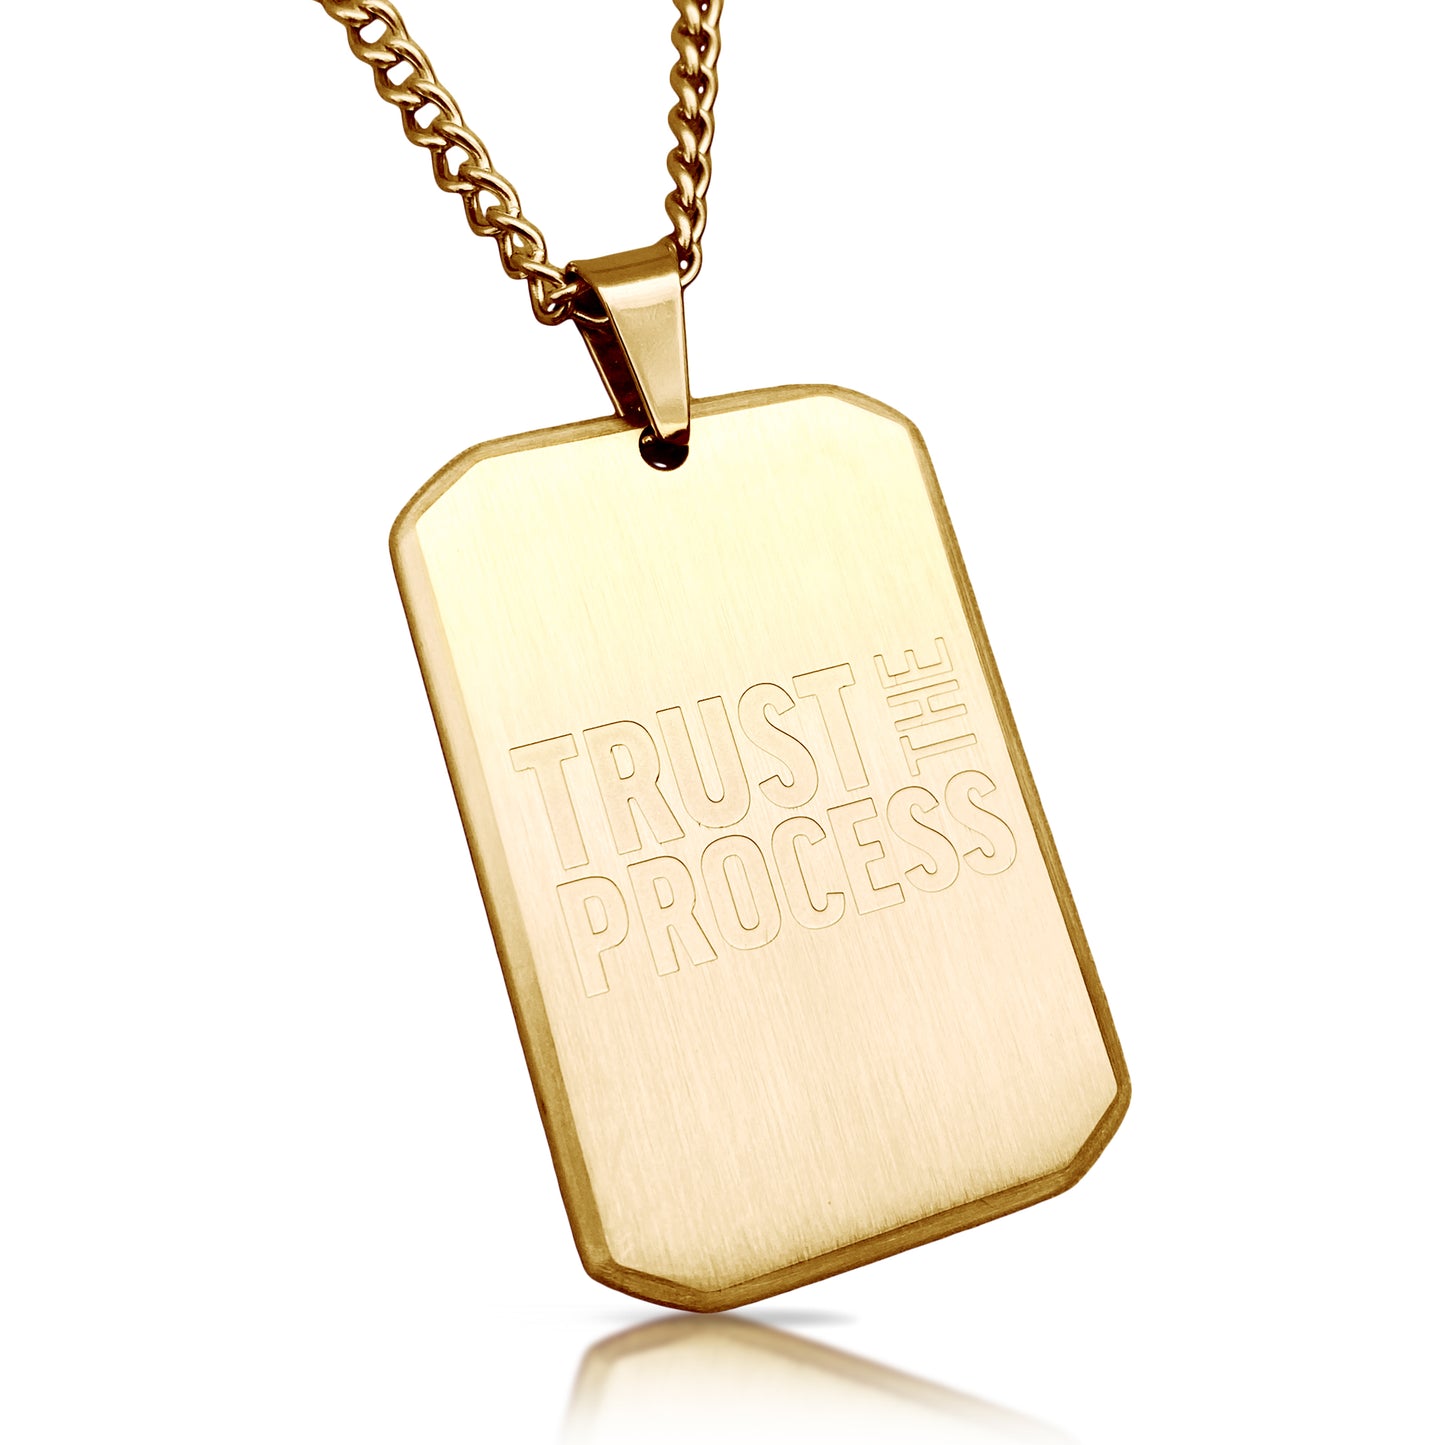 Trust The Process Pendant With Chain Necklace - 14K Gold Plated Stainless Steel